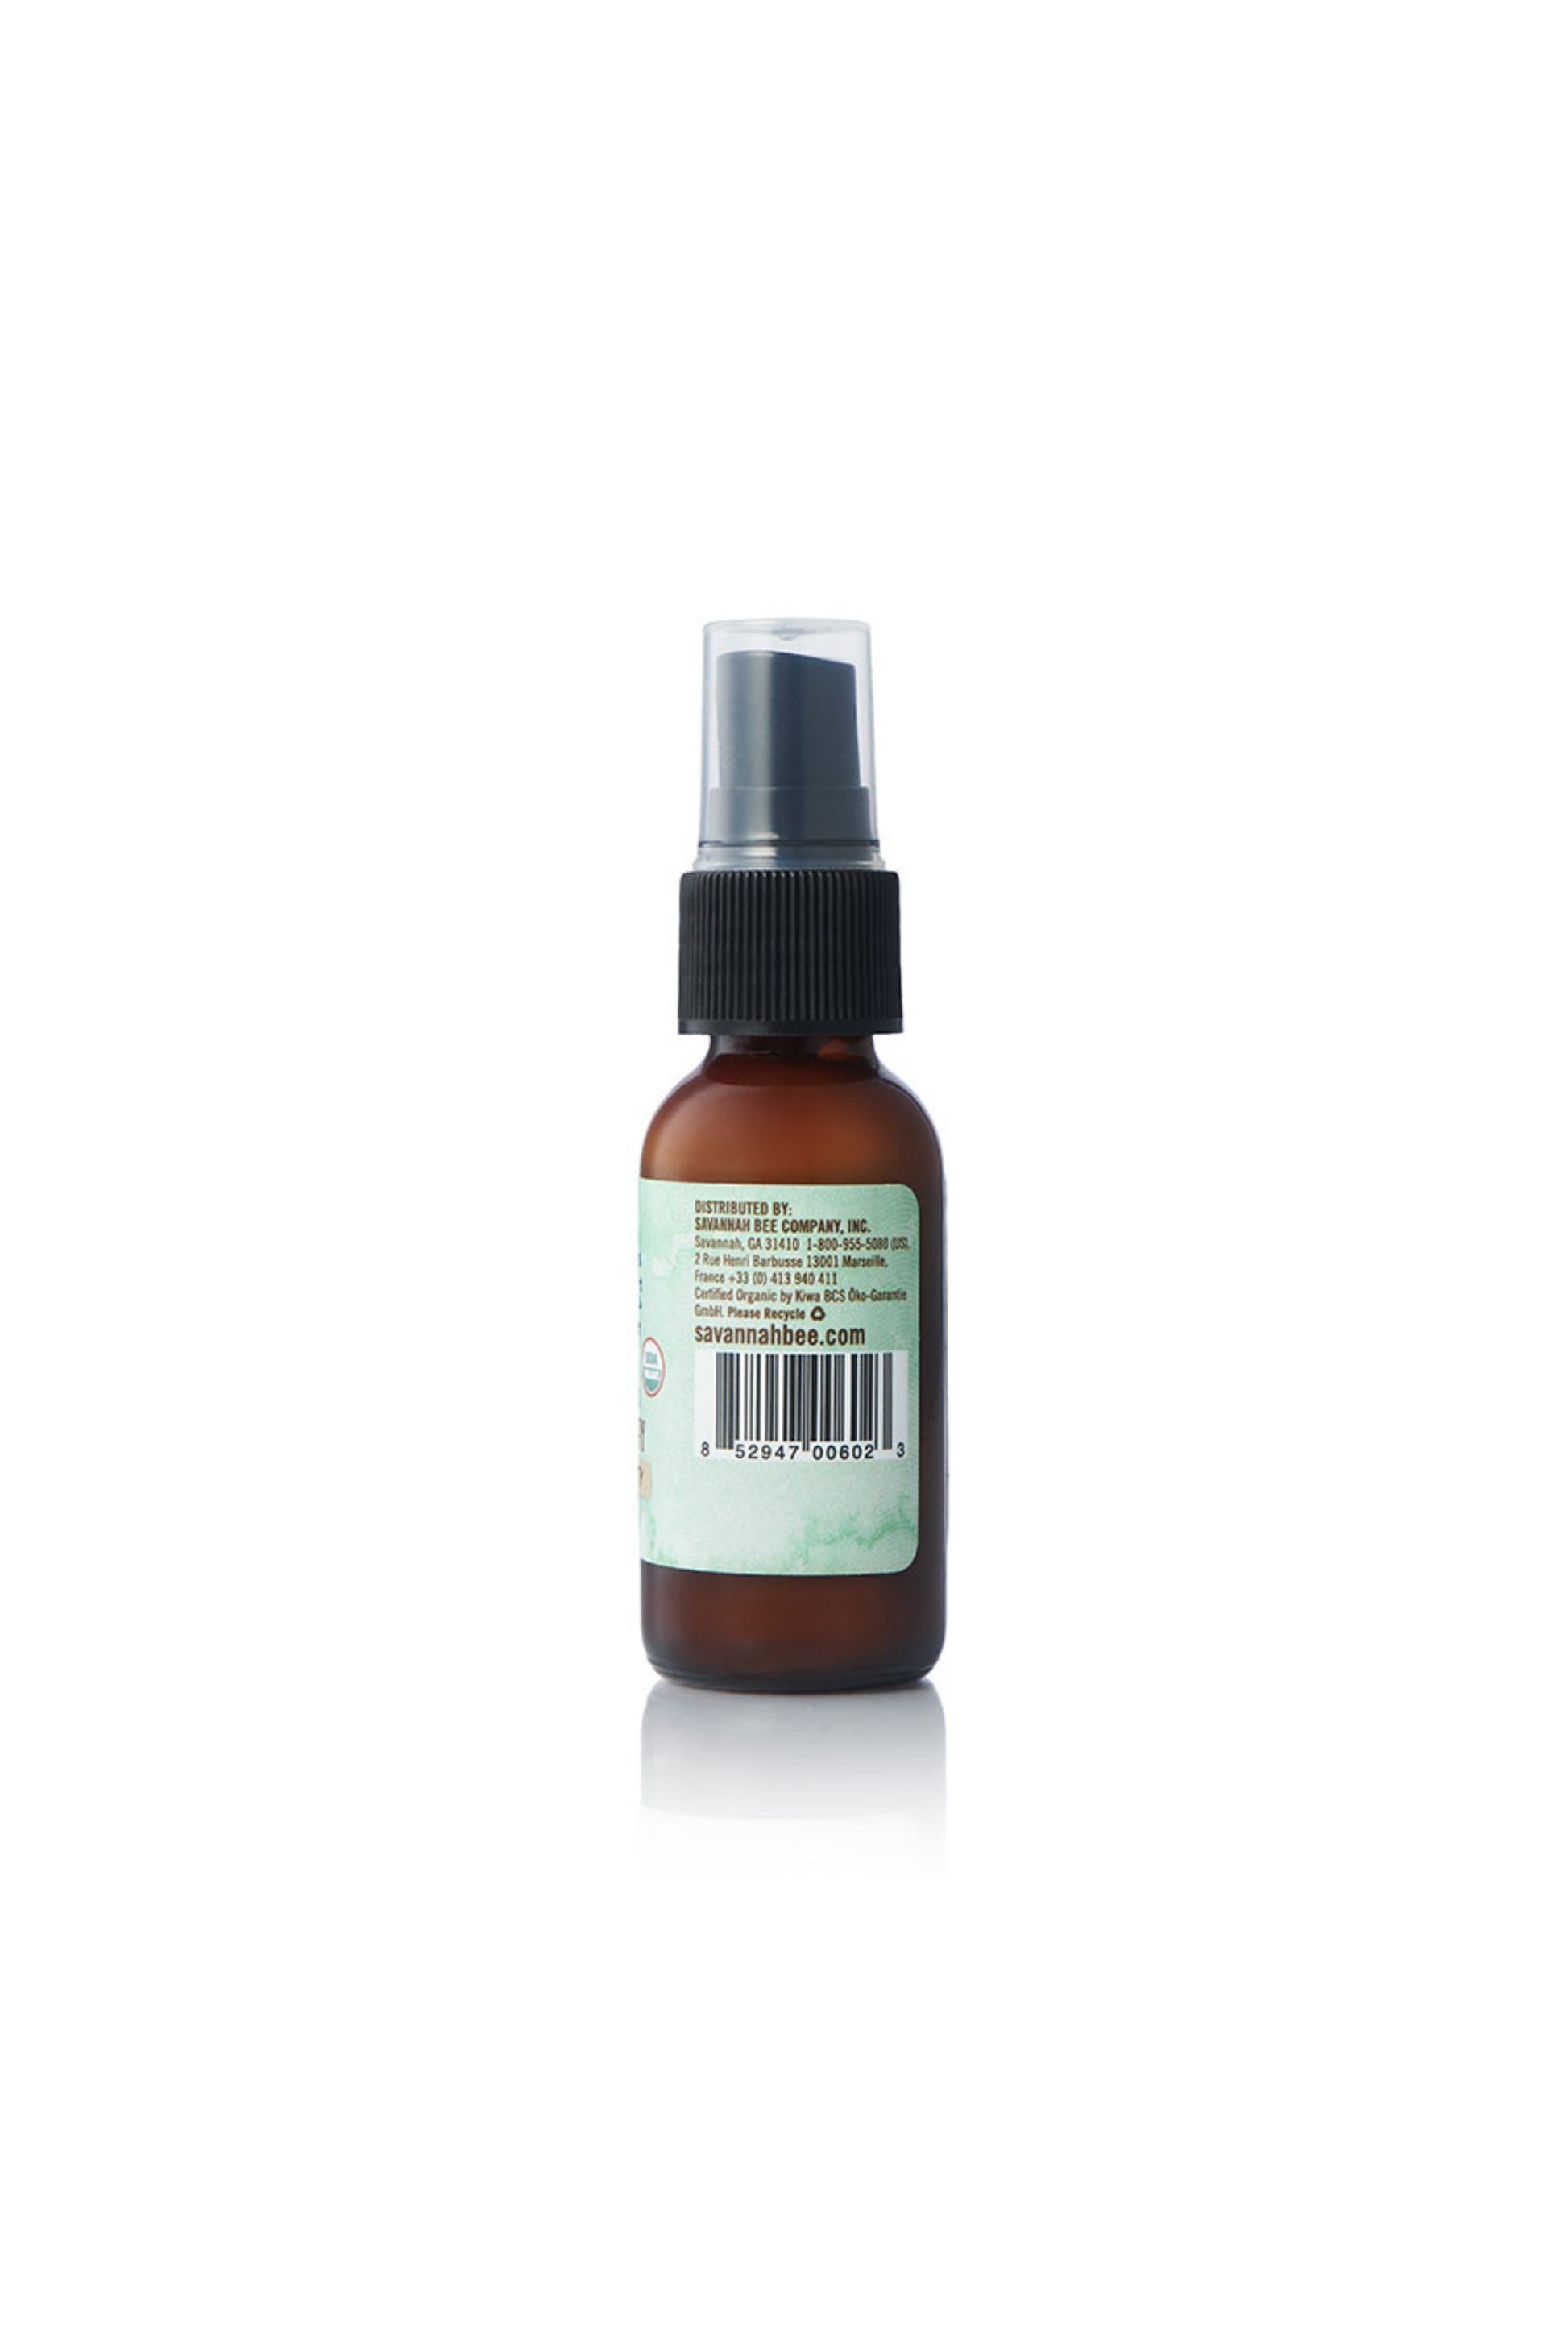 Sweet and Minty Propolis Spray 1 ounce back view